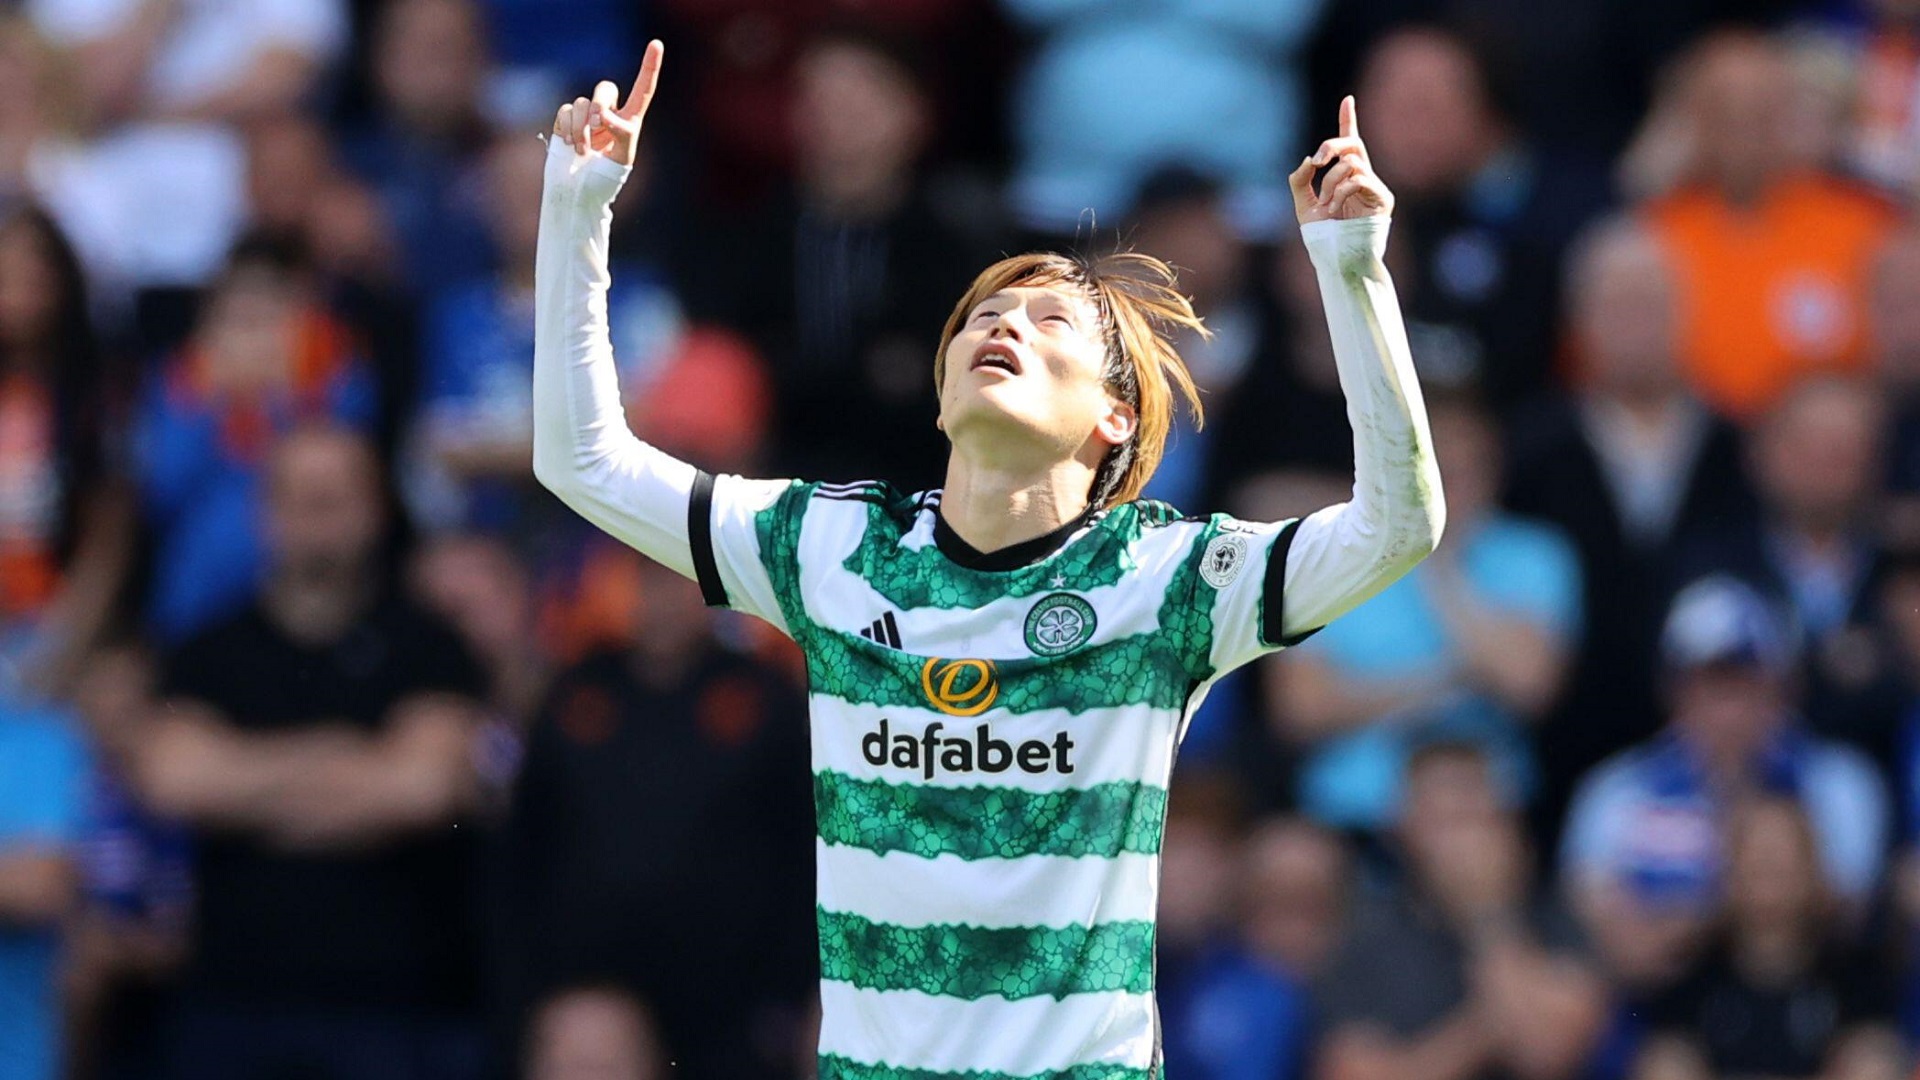 Celtic earn Old Firm win against Rangers with Kyogo Furuhashi goal